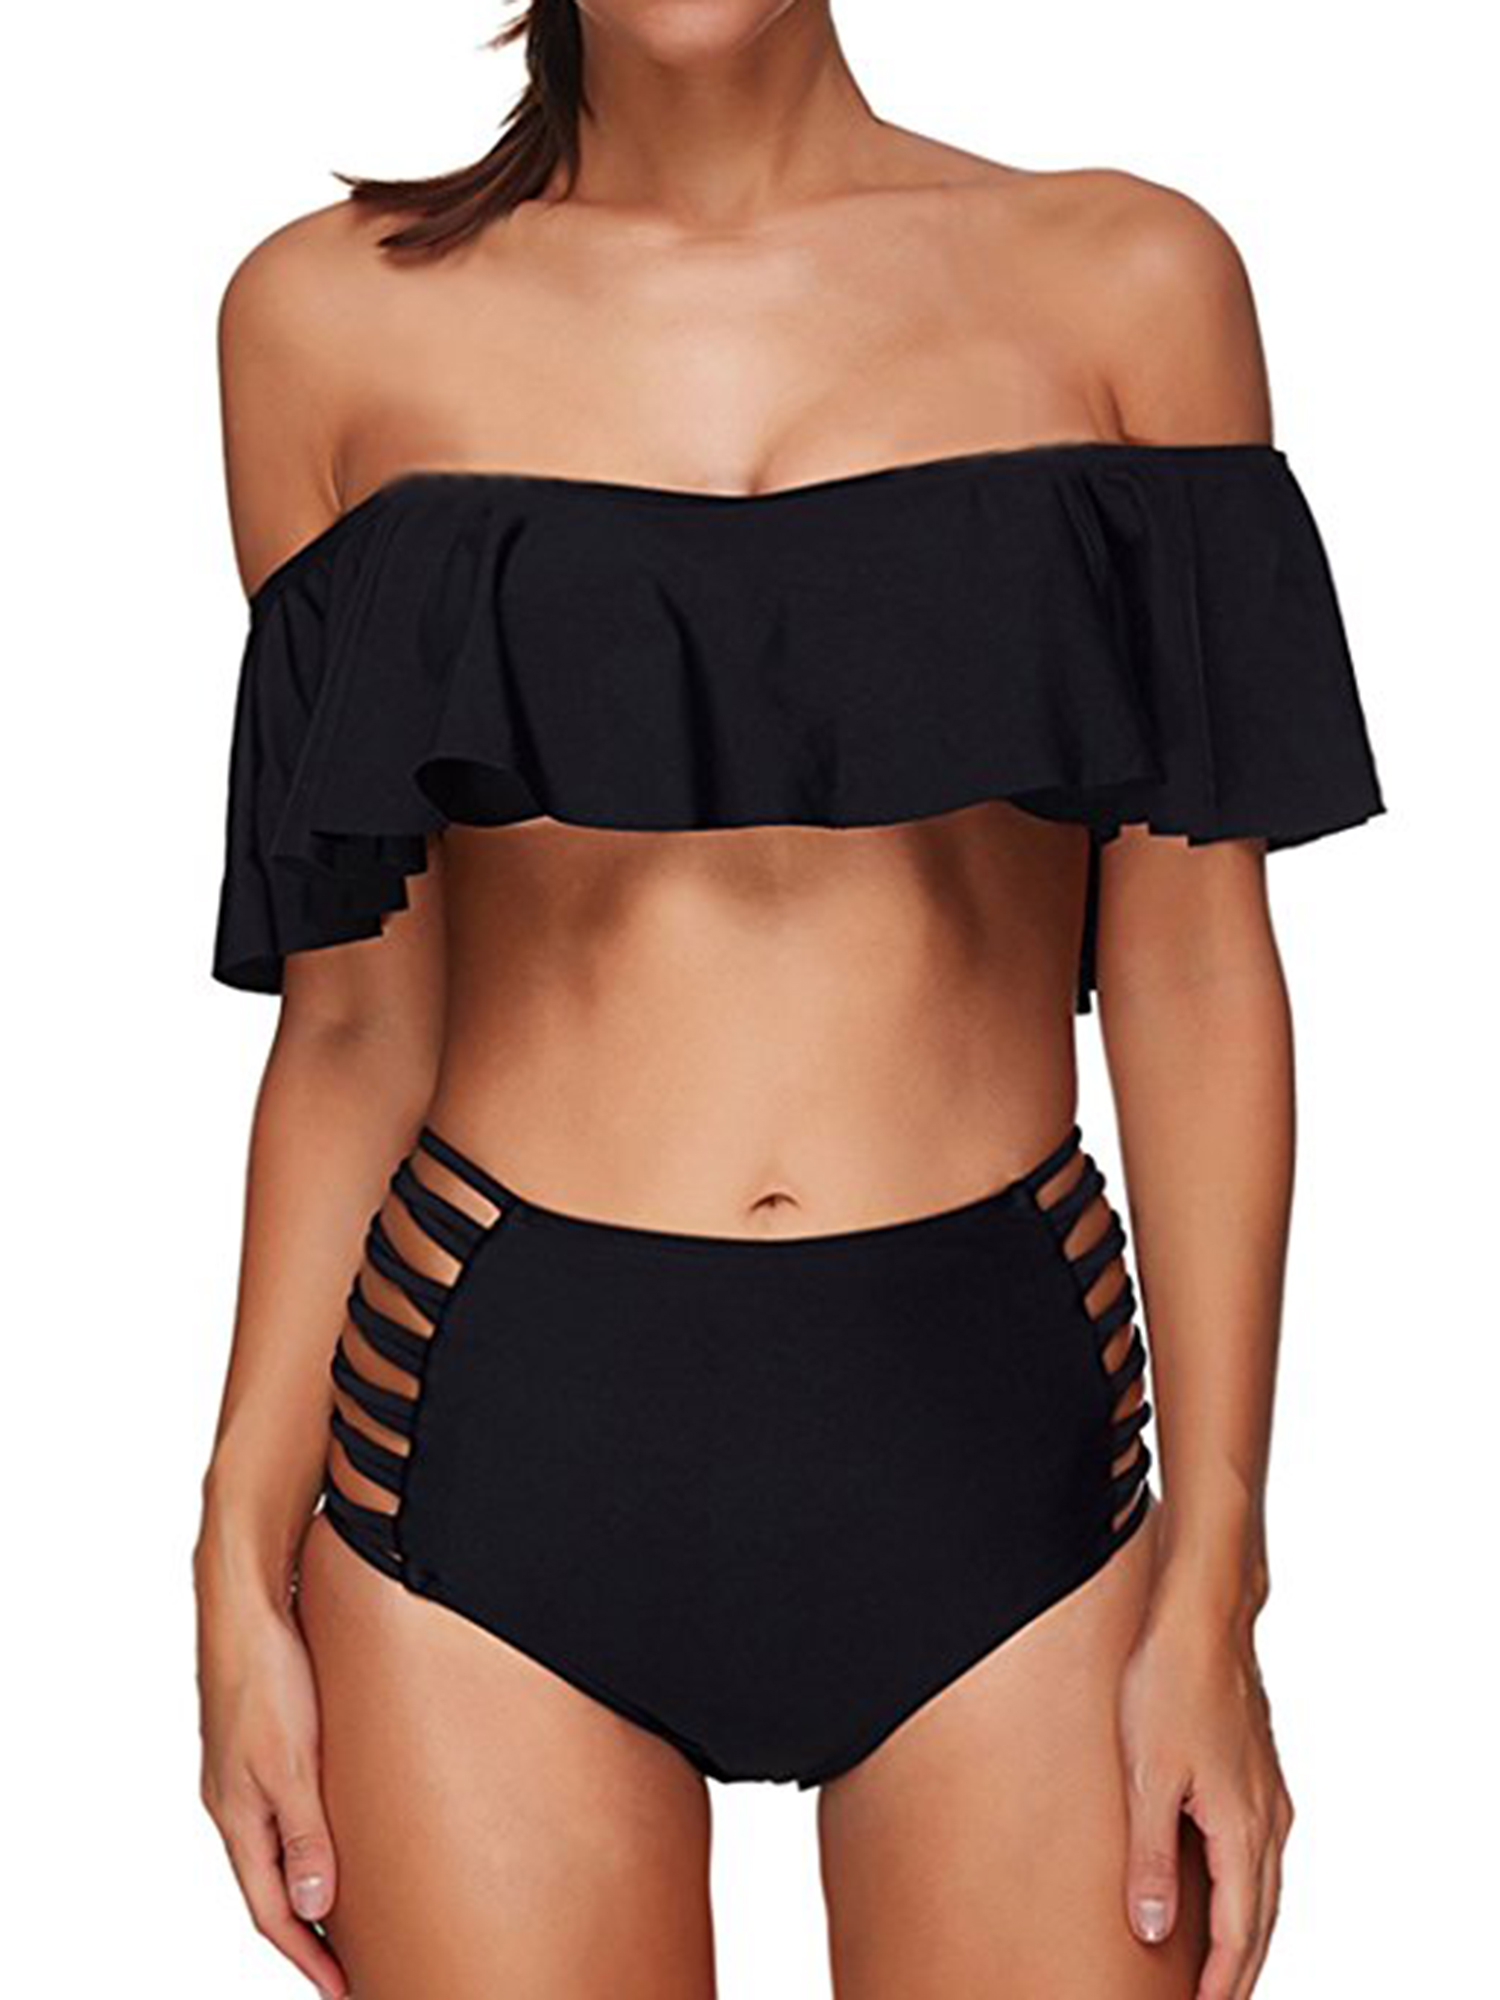 MAYW Off Shoulder Strapless Swimsuit Adjustable Waisted 2 Pieces Swimsuit Sets